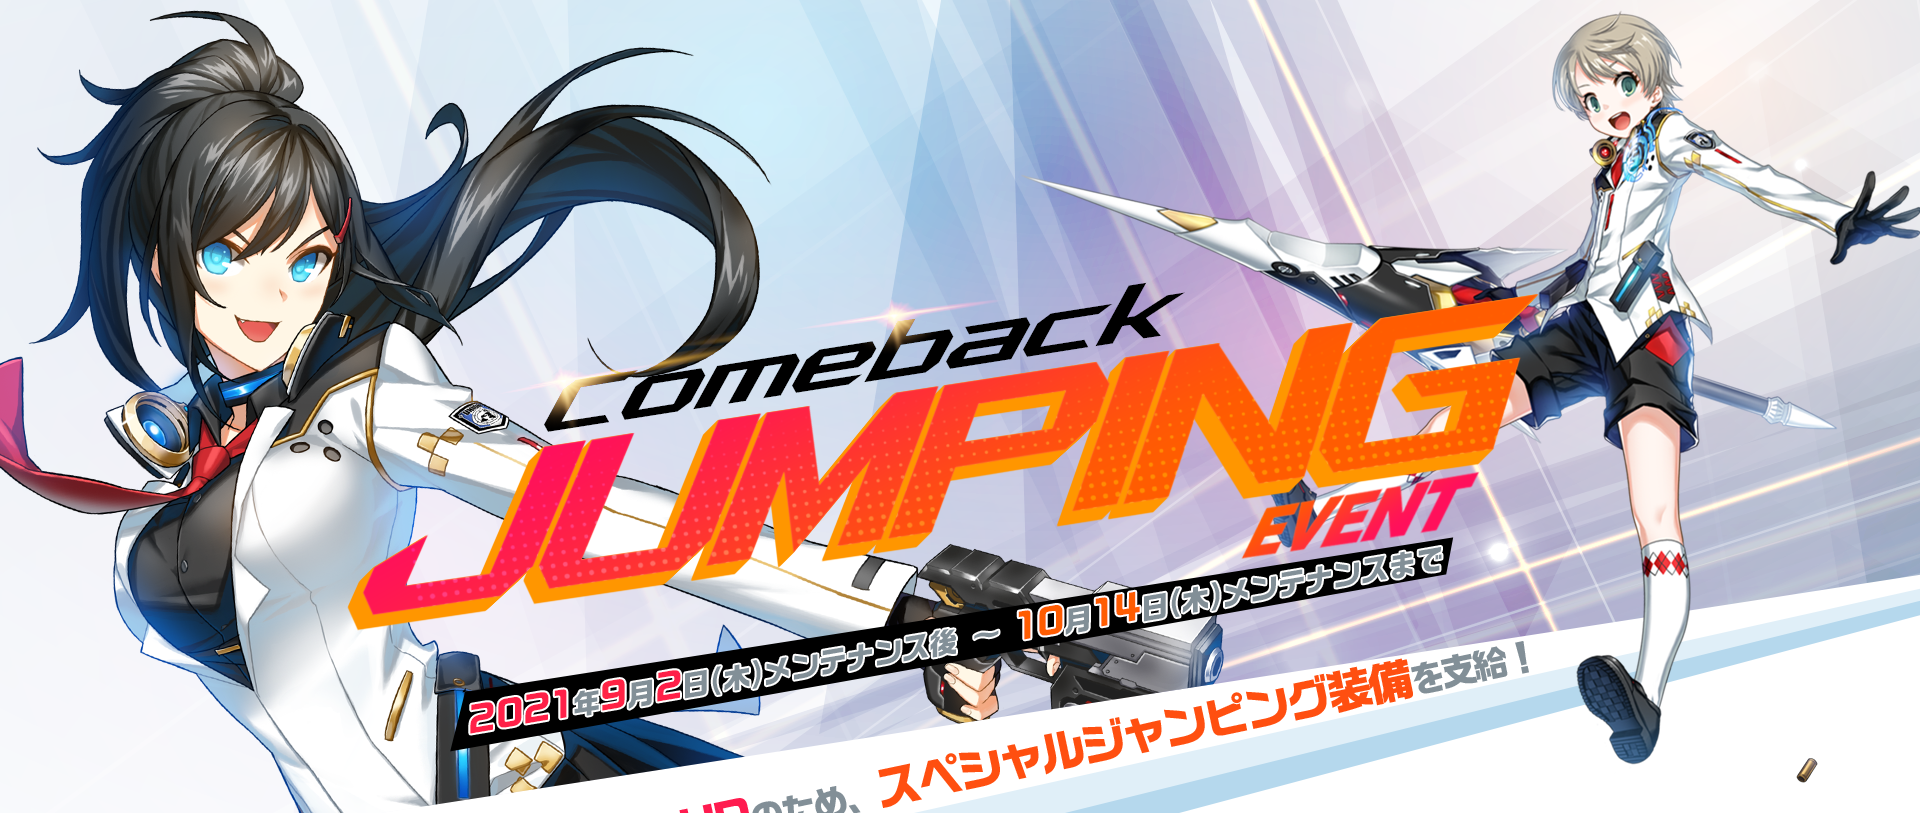 COME BACK JUMPING イベント